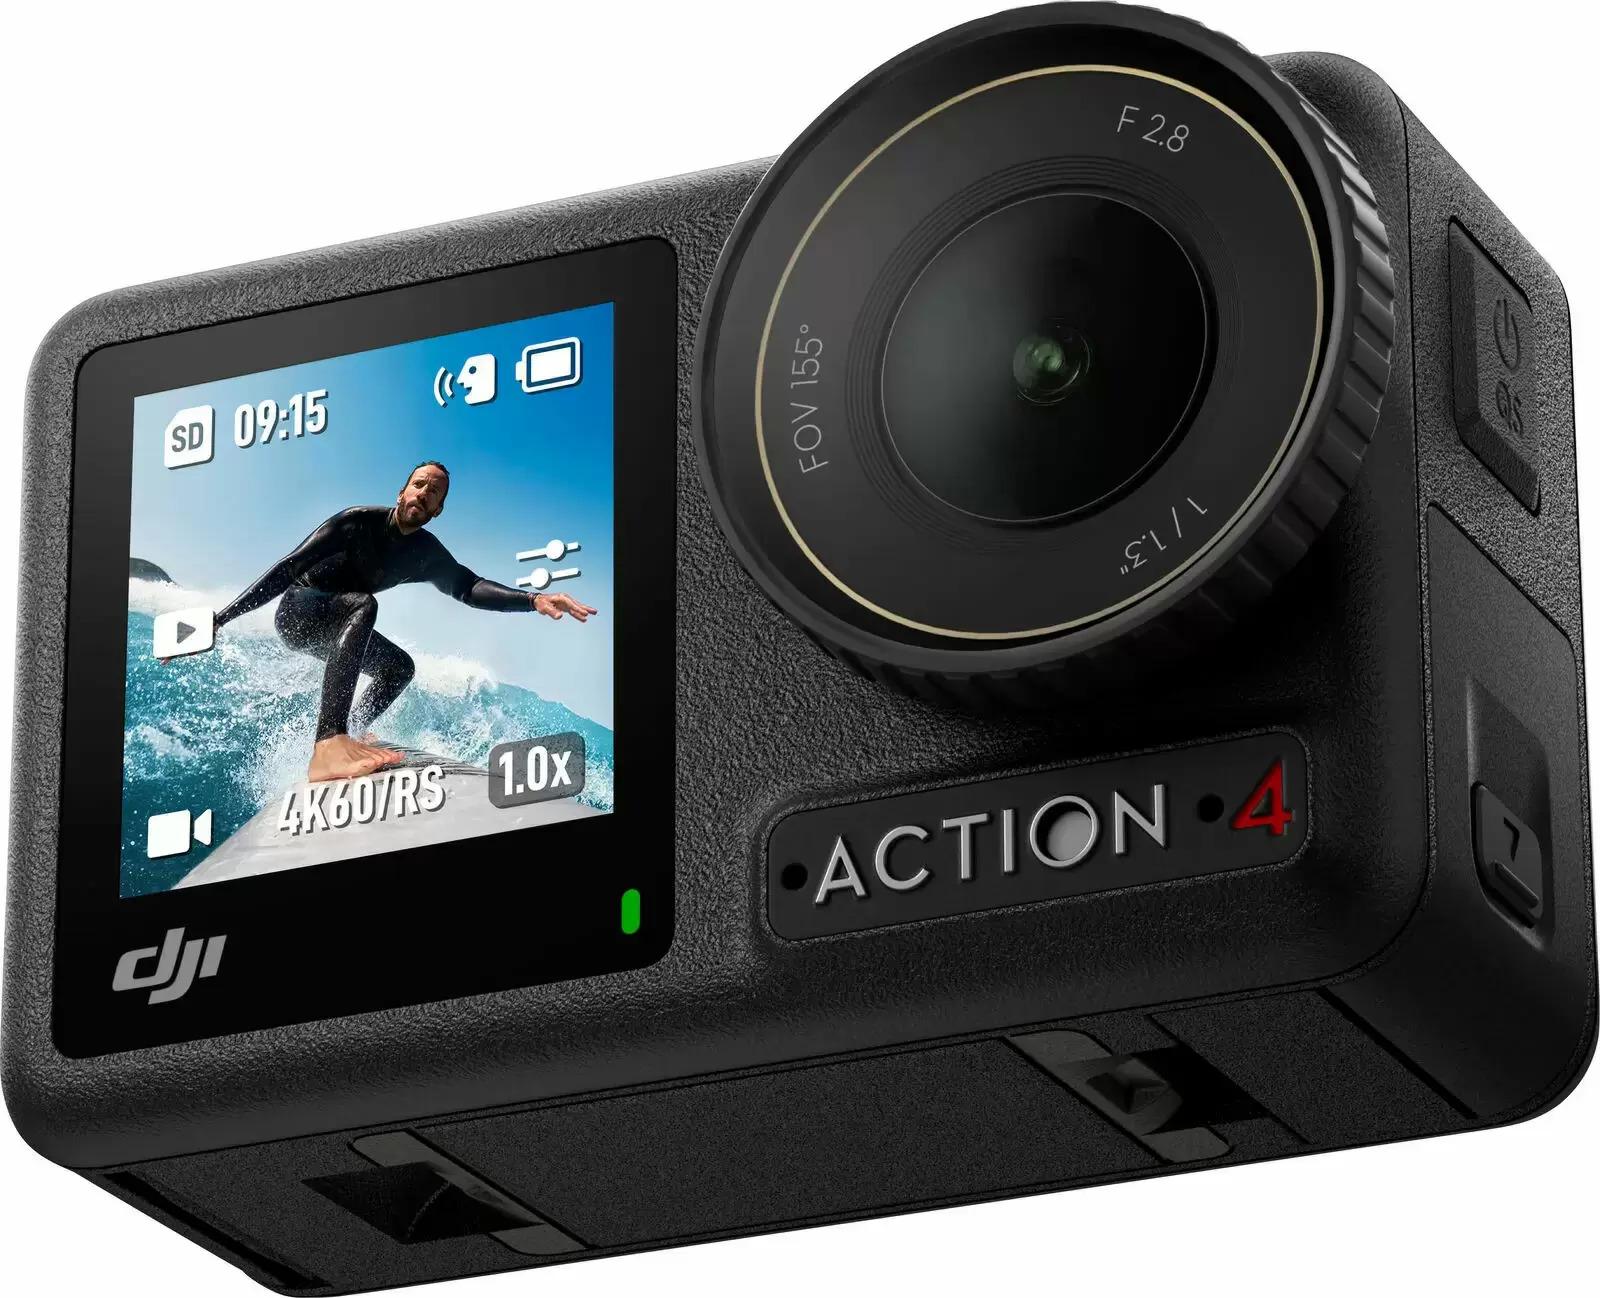 DJI Osmo Action 4 4K Action Camera Refurbished for $239 Shipped